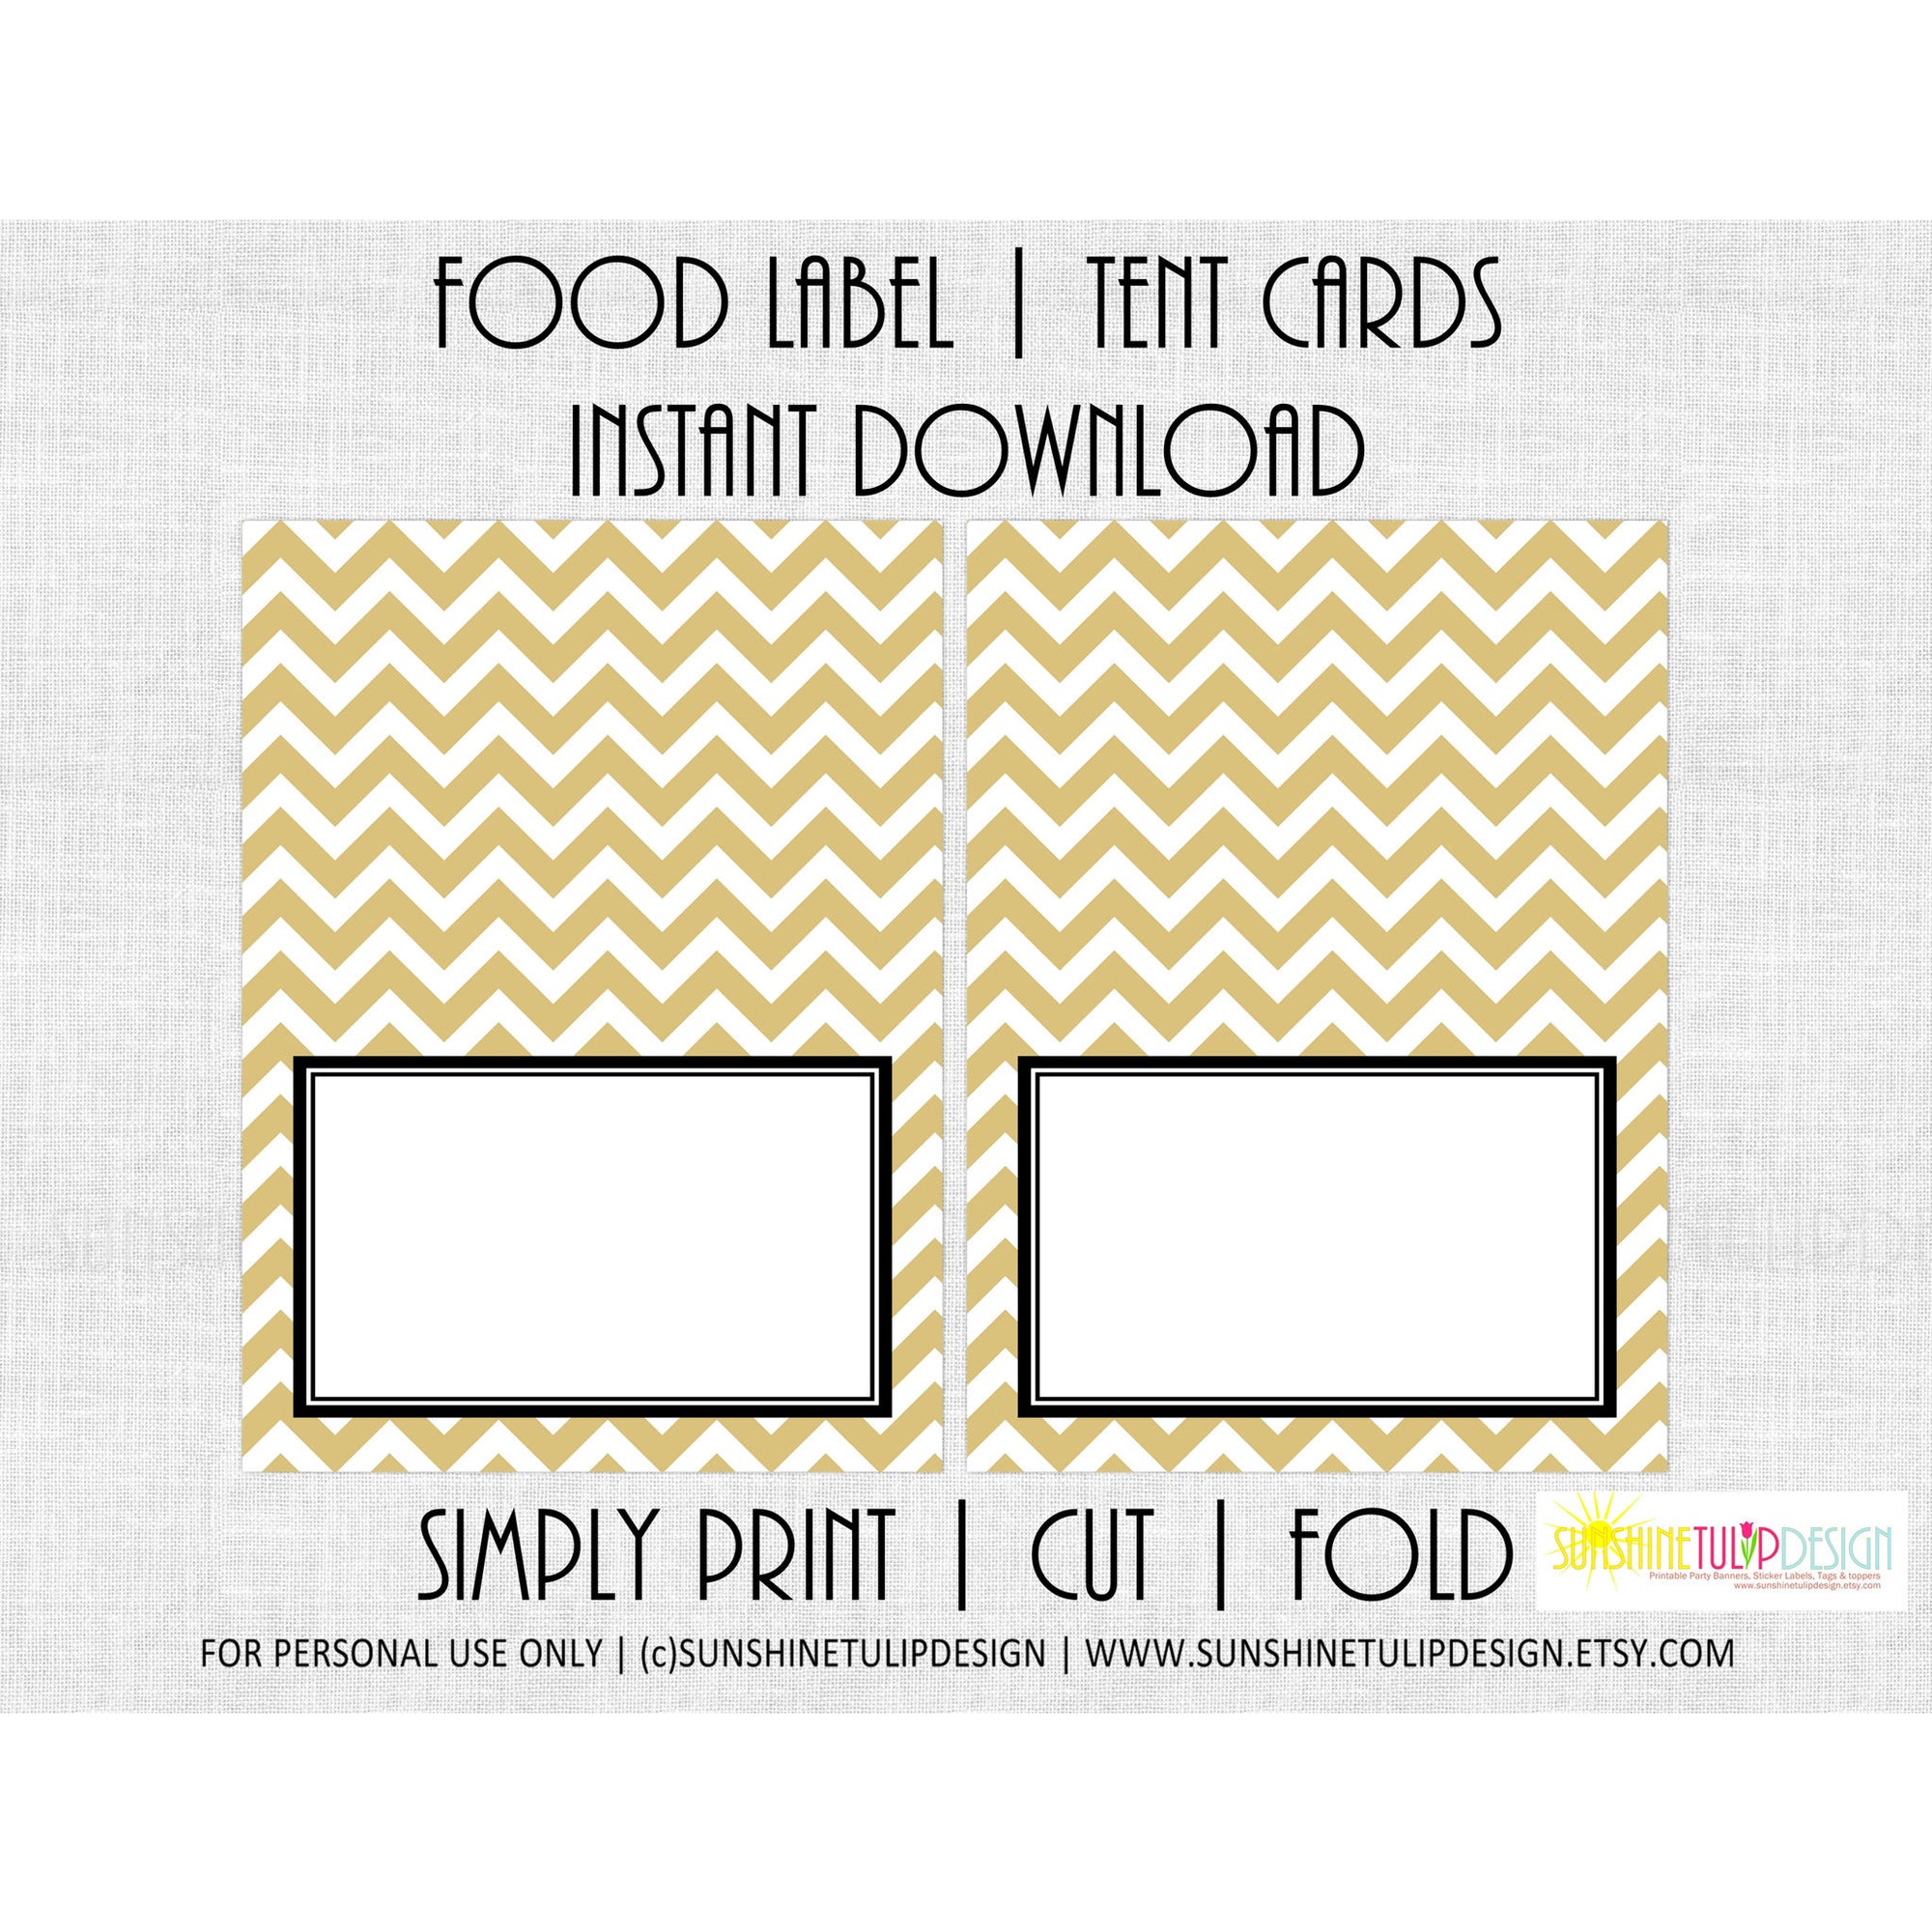 printable-food-tent-cards-printable-green-white-stripe-food-label-t